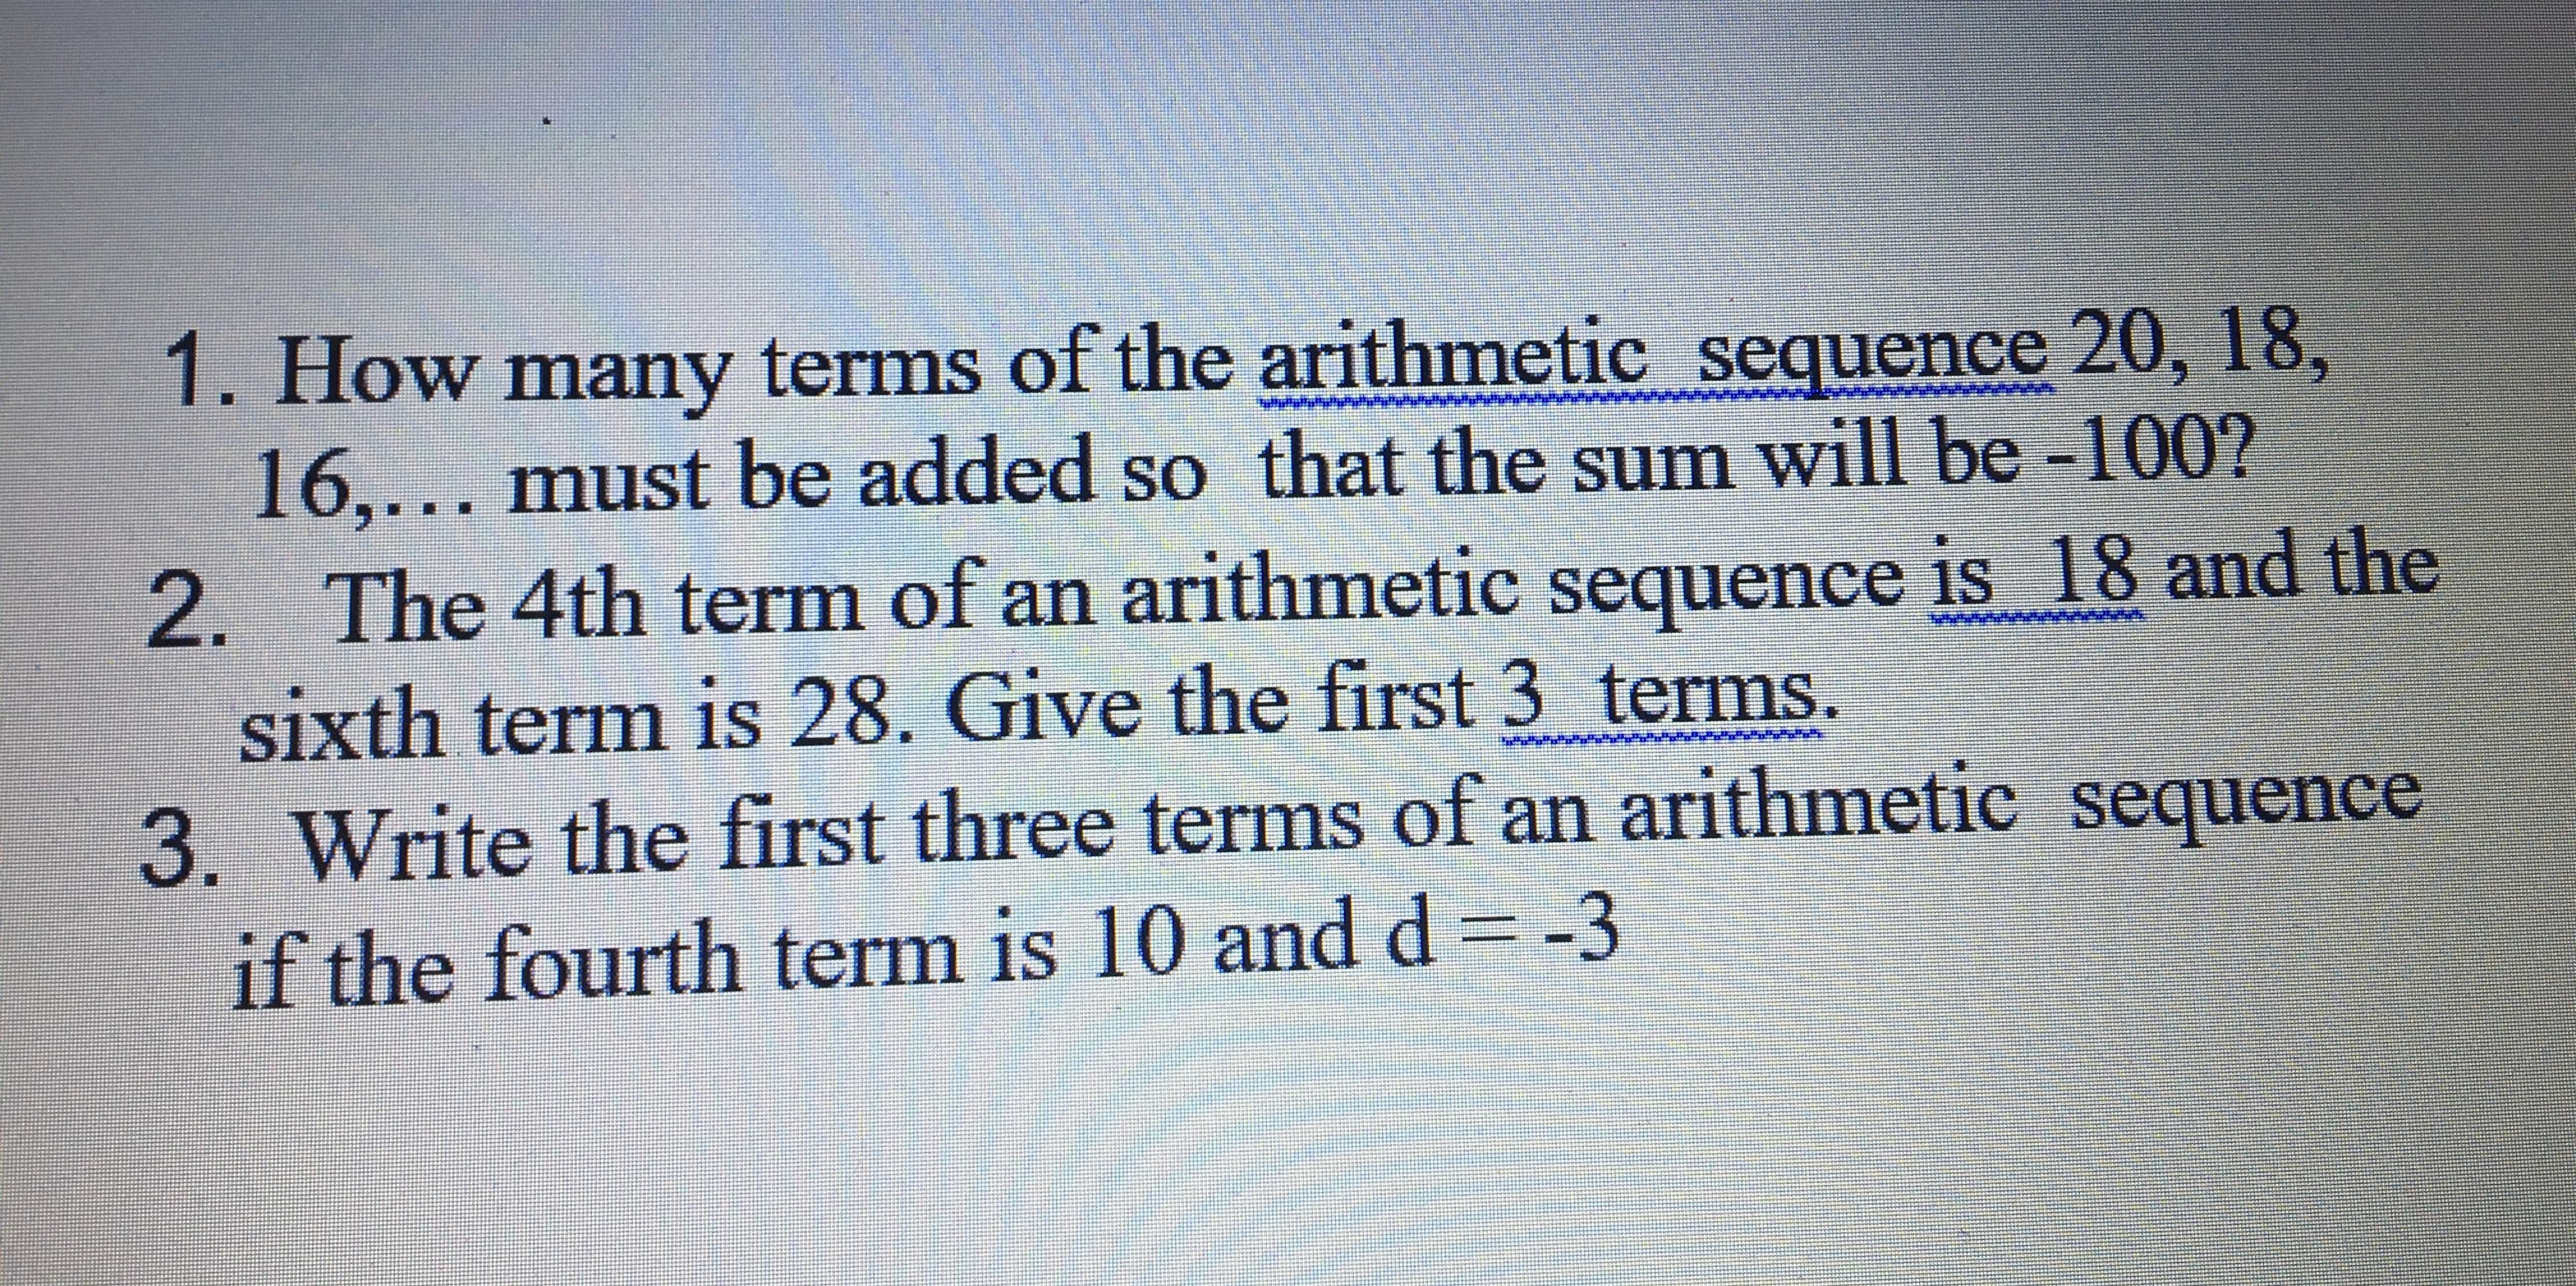 How many terms of the arithmetic sequence 20, 18,
16.... must be added so that the sum will be -100?
